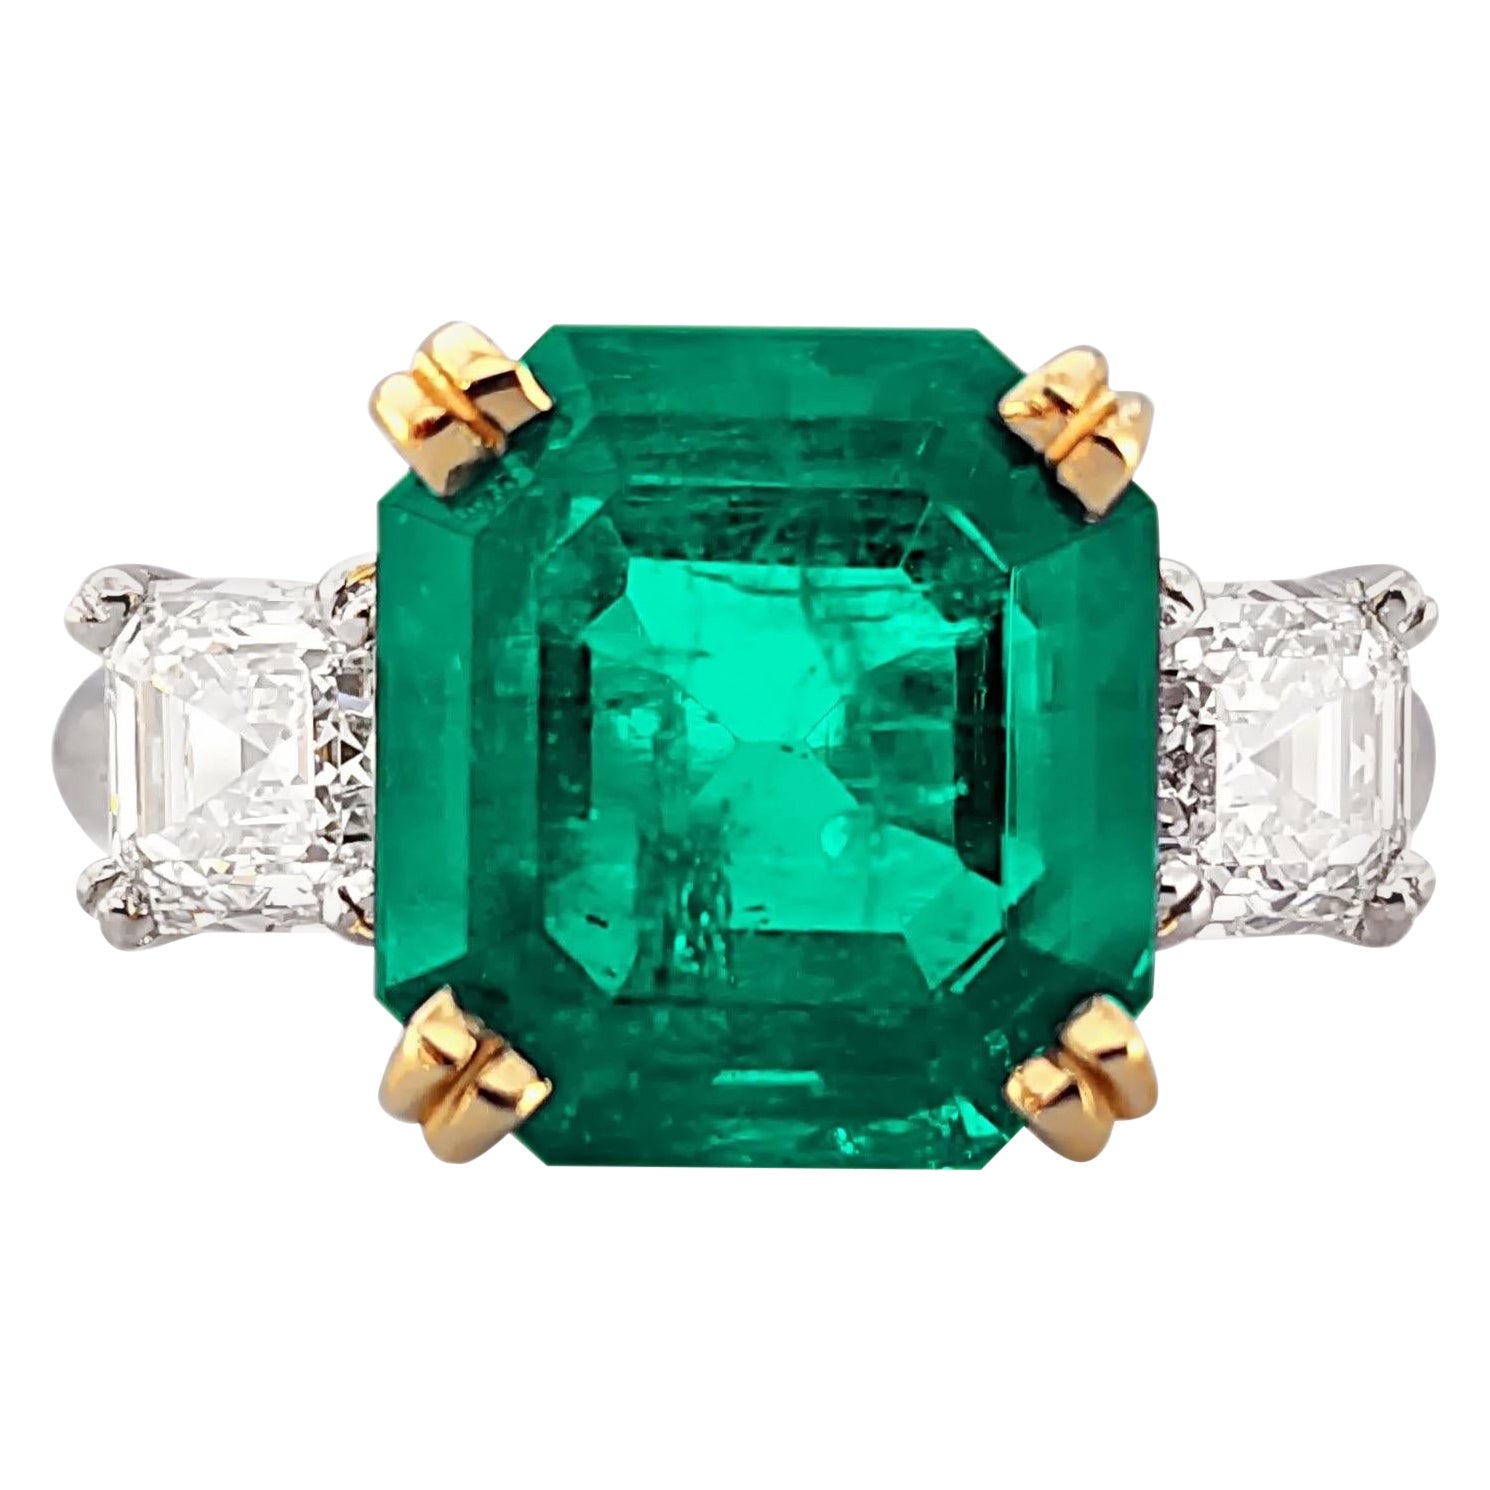 6.08 Carat Traditional Colombian Emerald Cut Emerald and Ascher Diamond Ring